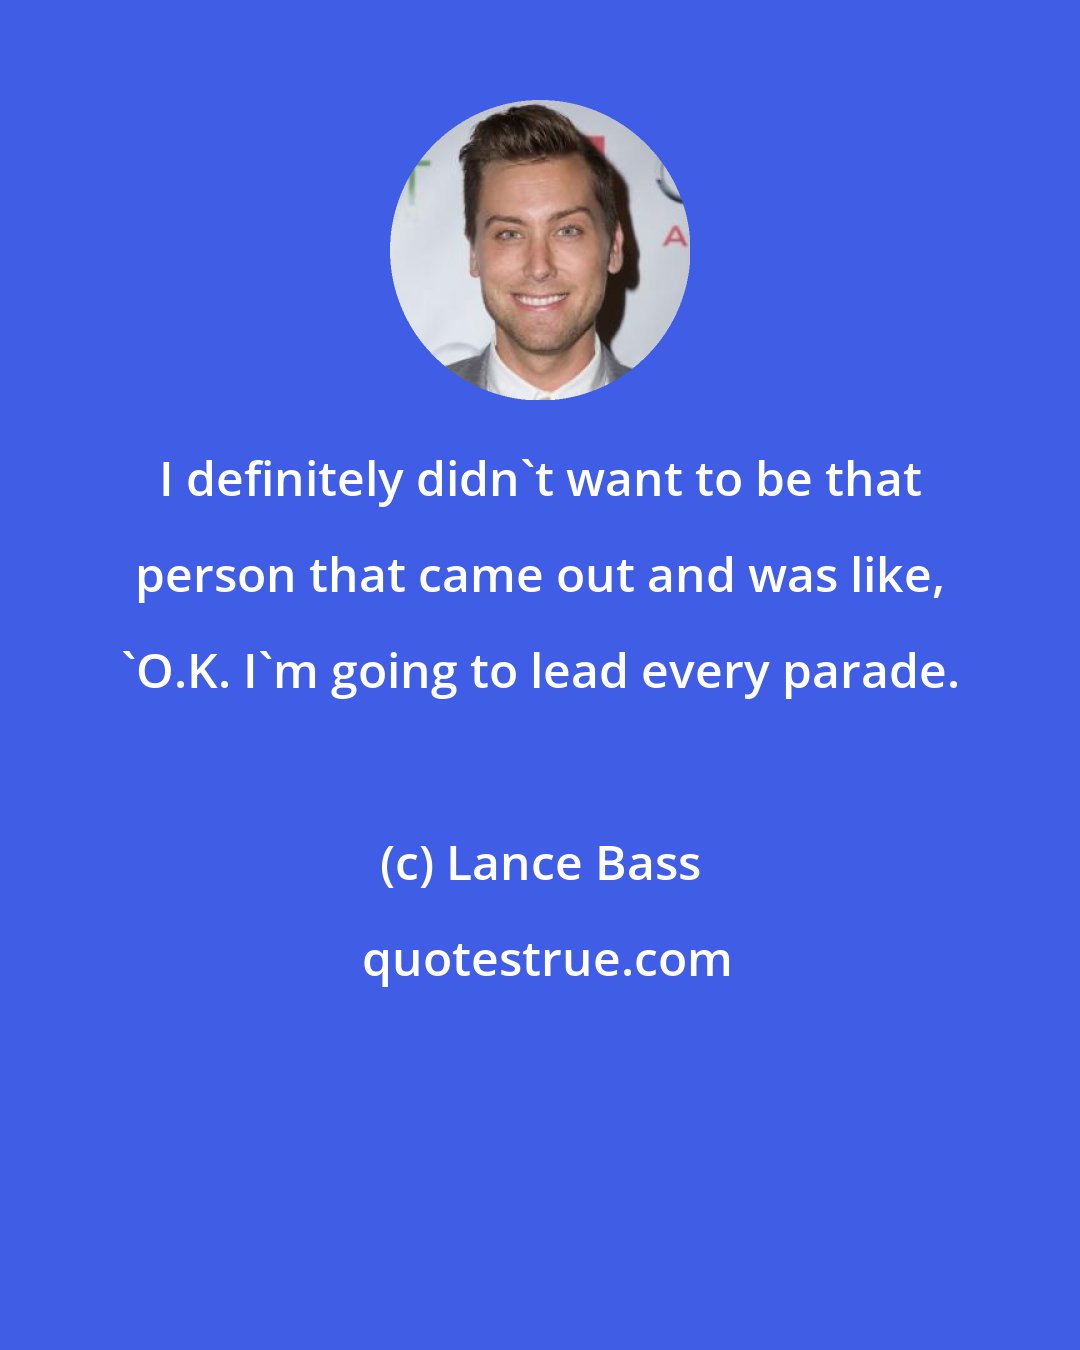 Lance Bass: I definitely didn't want to be that person that came out and was like, 'O.K. I'm going to lead every parade.